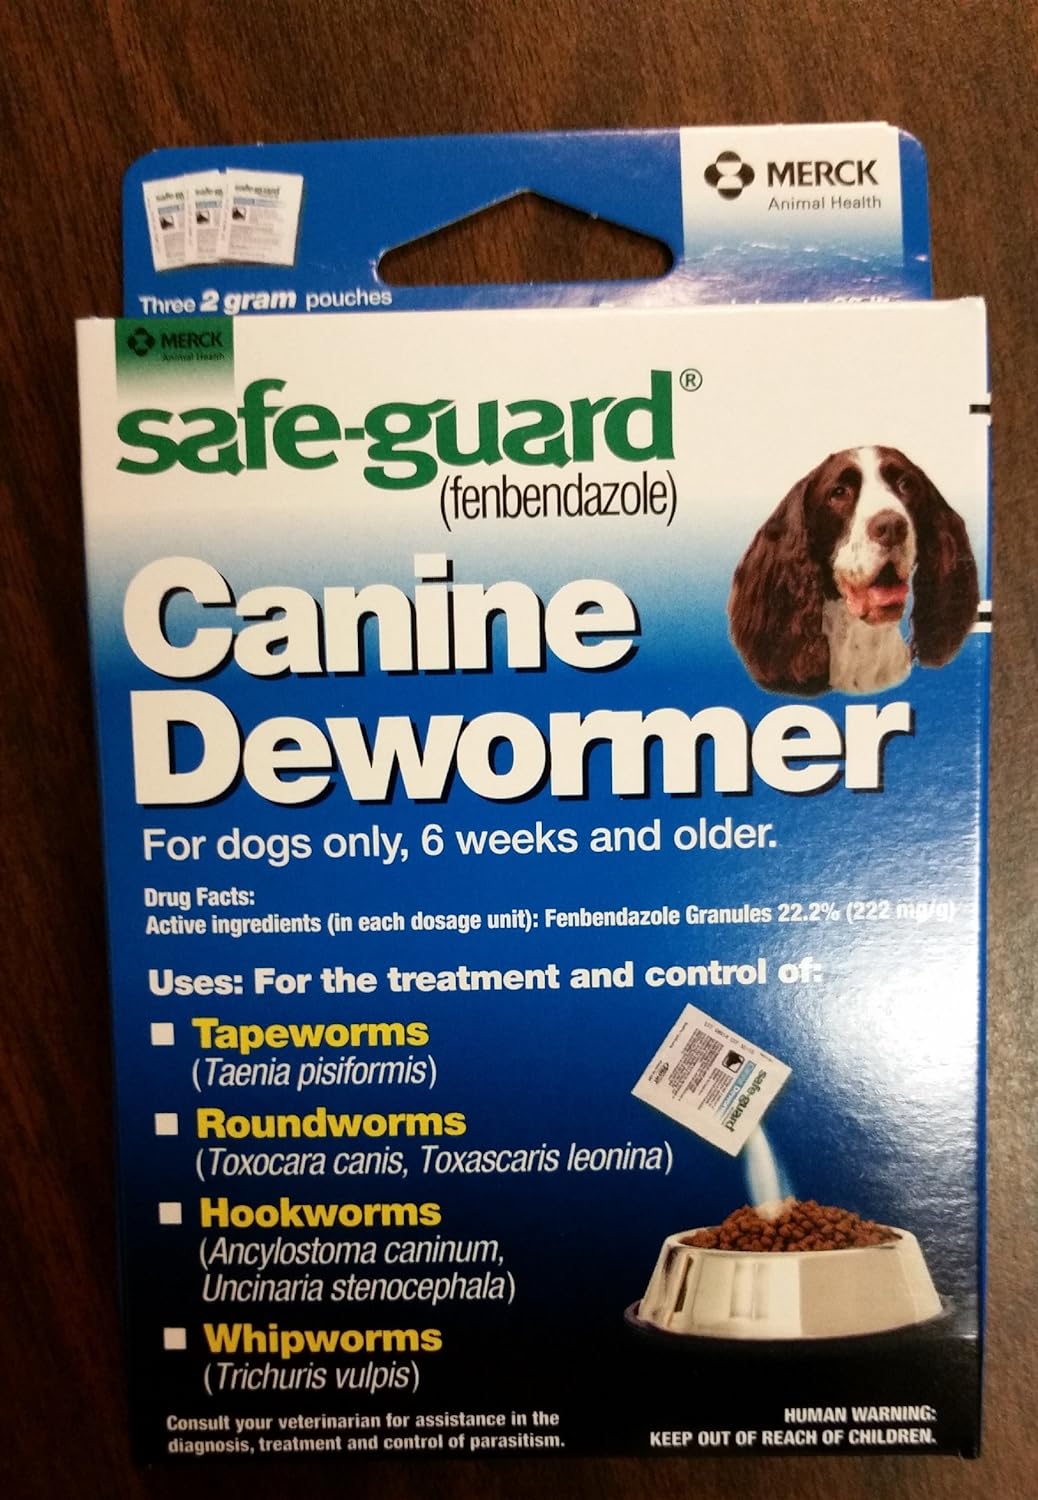 Pro-Sense Safe-Guard 4, Canine Dewormer for Dogs, 3-Day Treatment